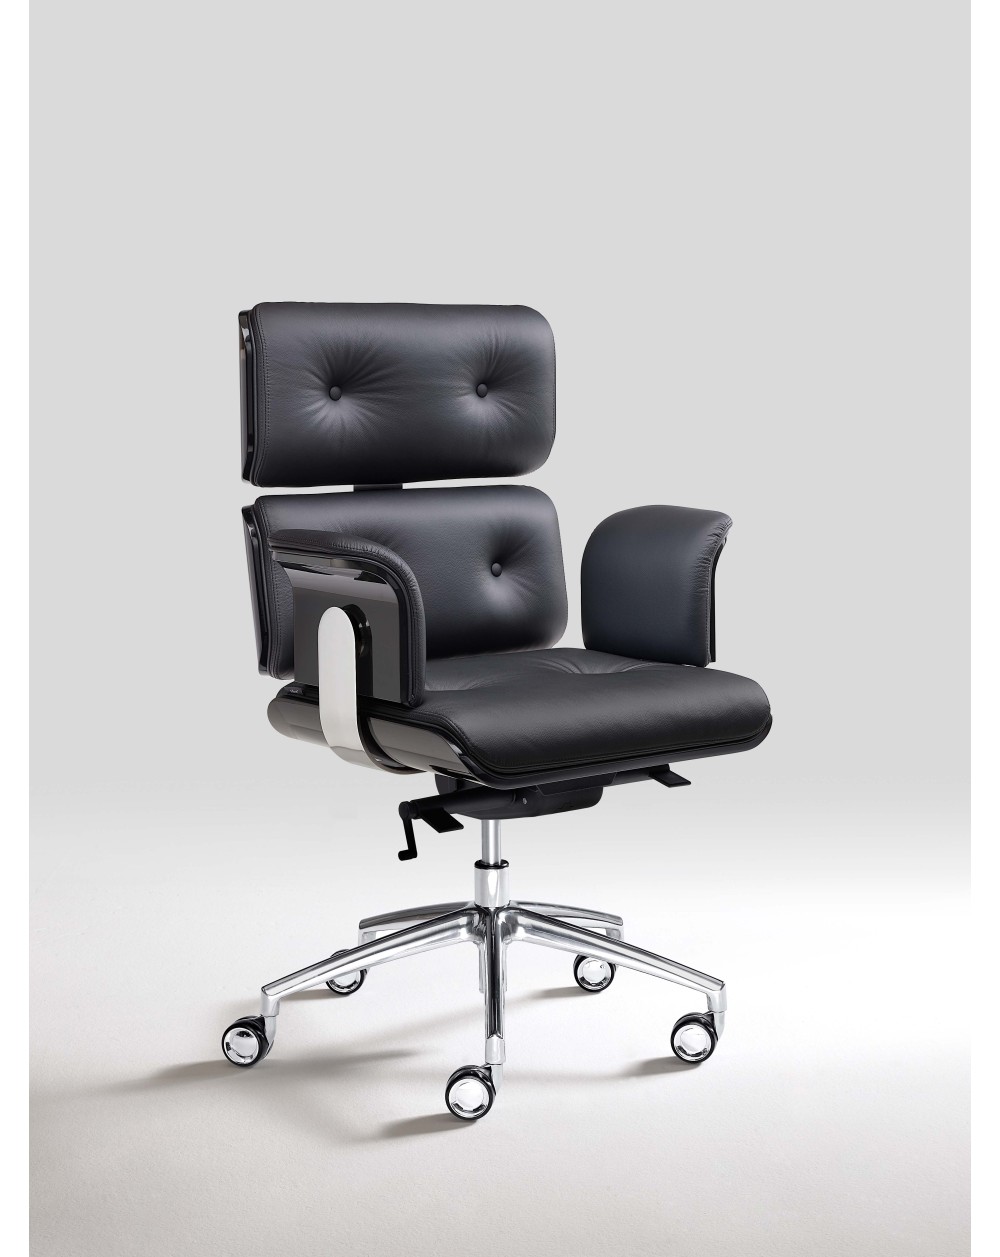 Executive Armchair Armadillo In Black With Armrests and Chromed Base